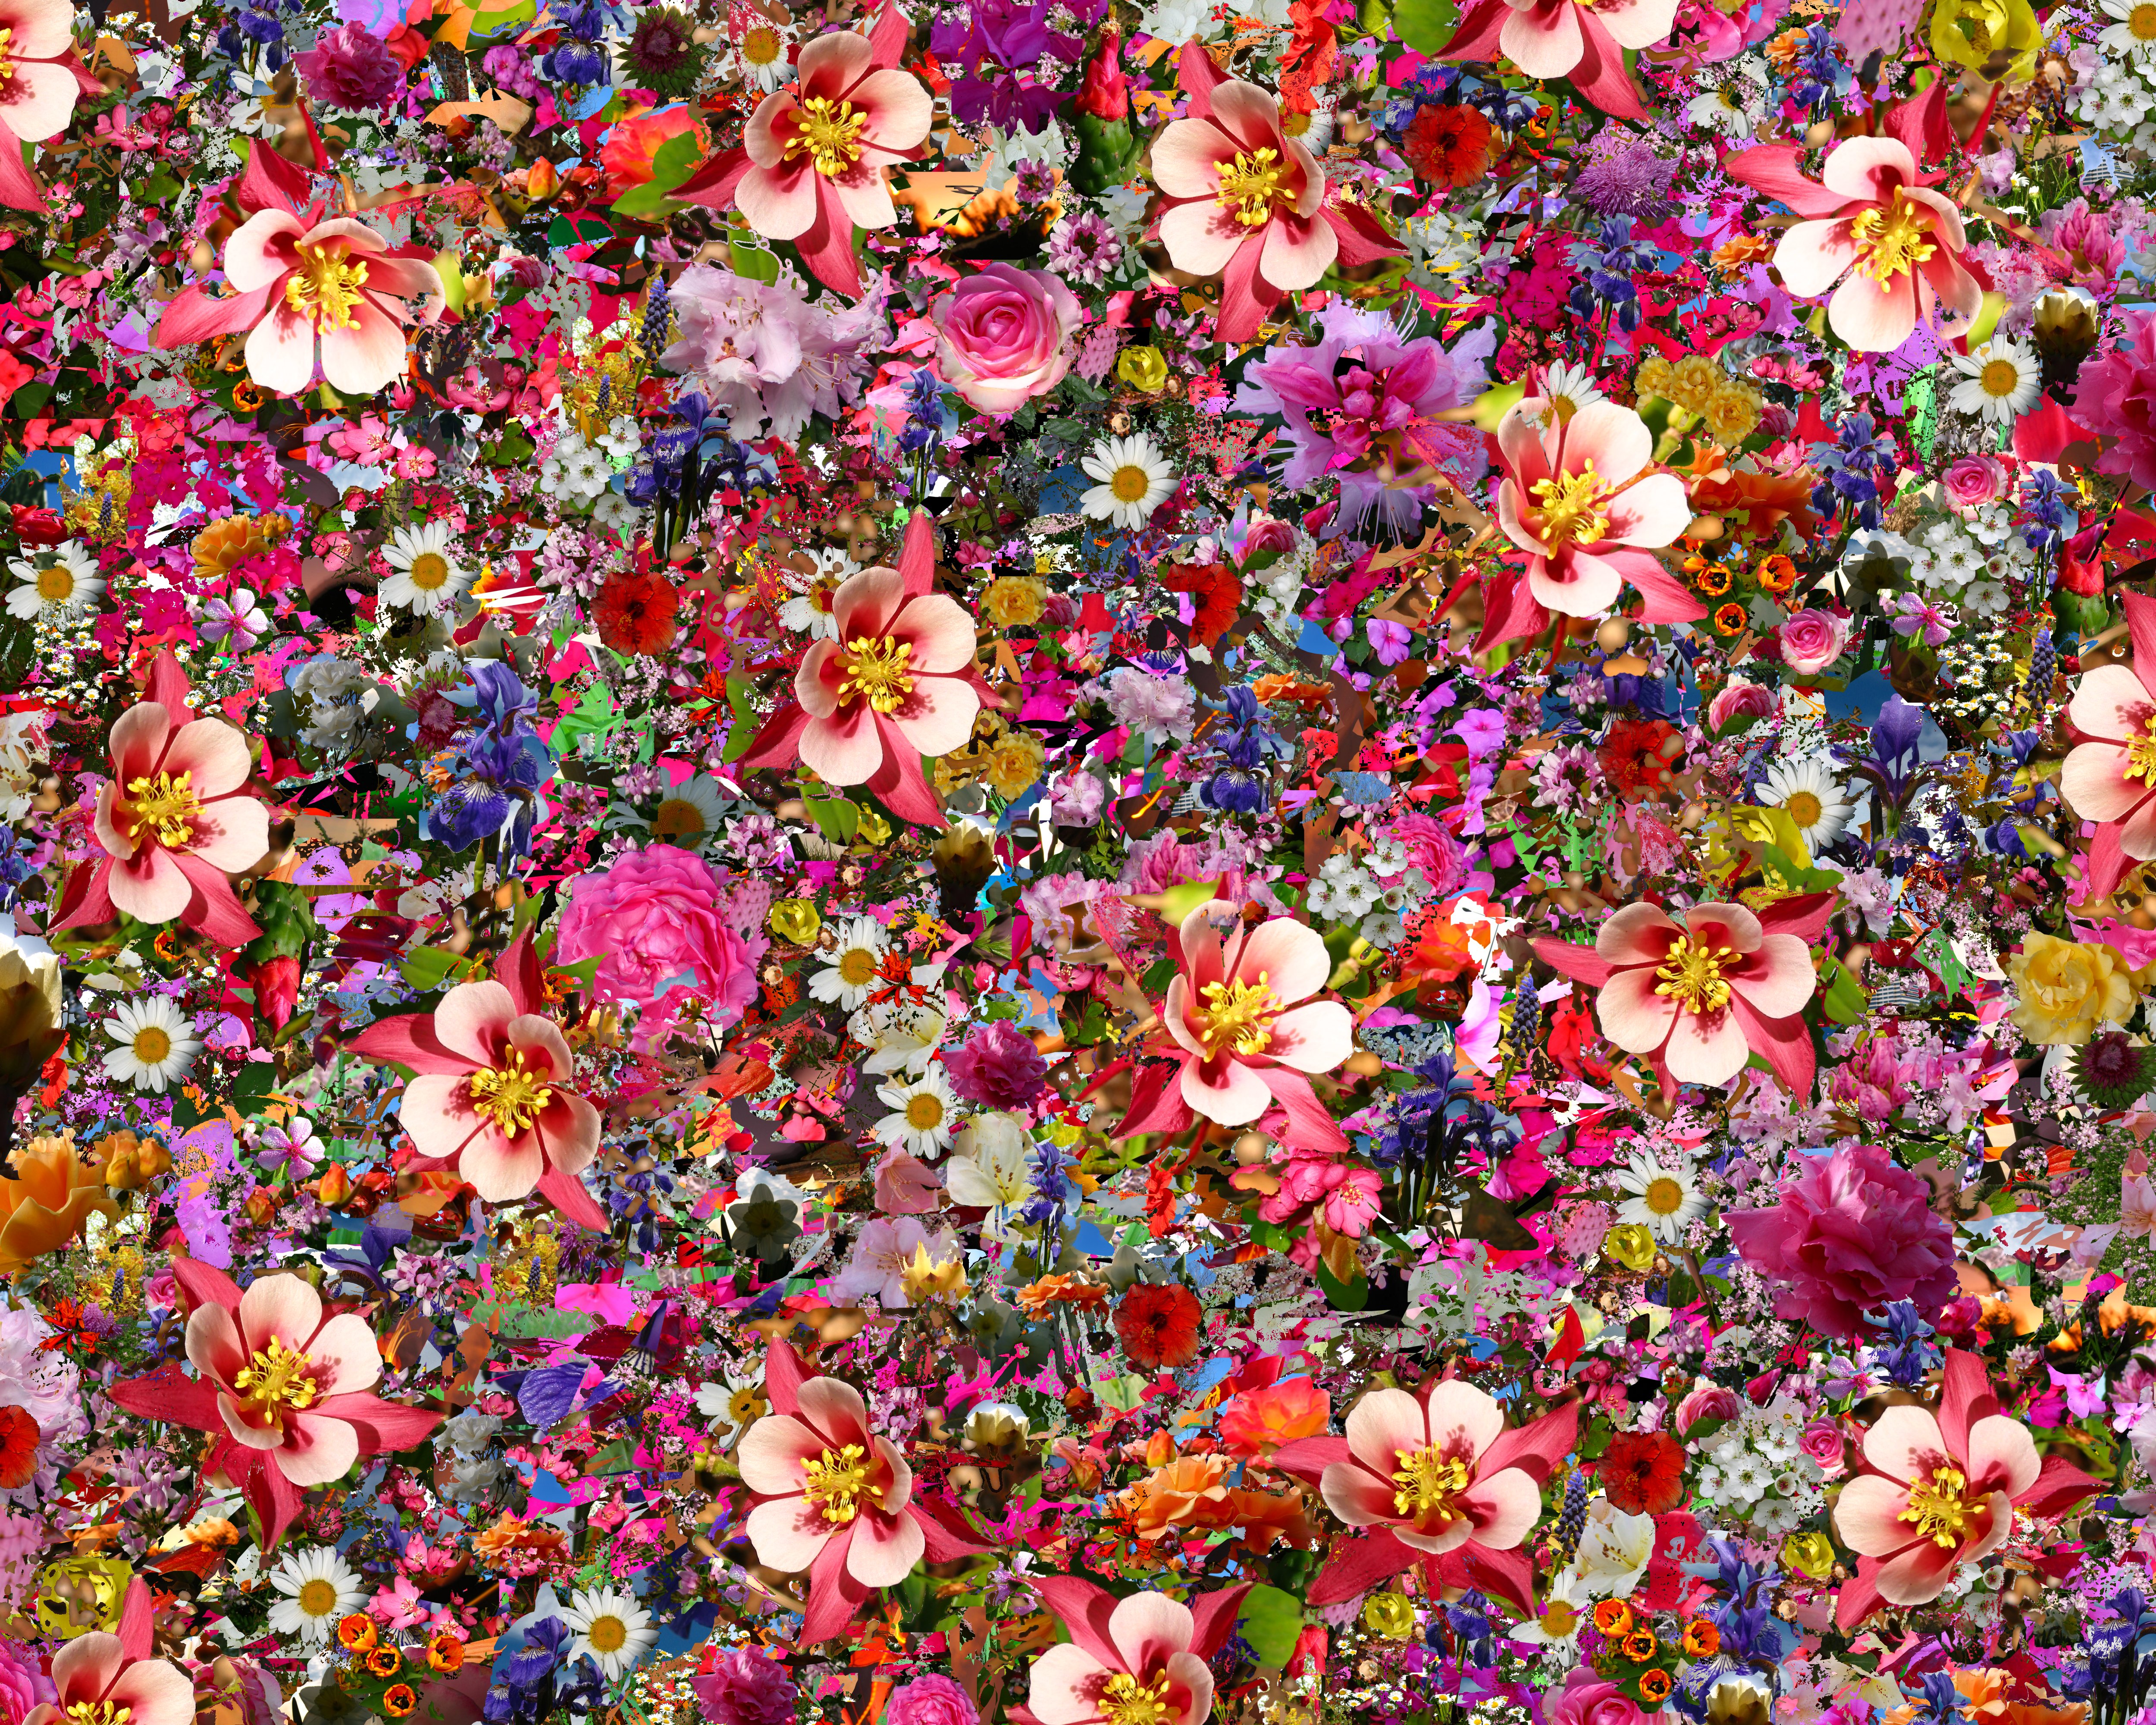 Soul Amp: Psychedelic Columbine Flower Photo Collage - Massive ...